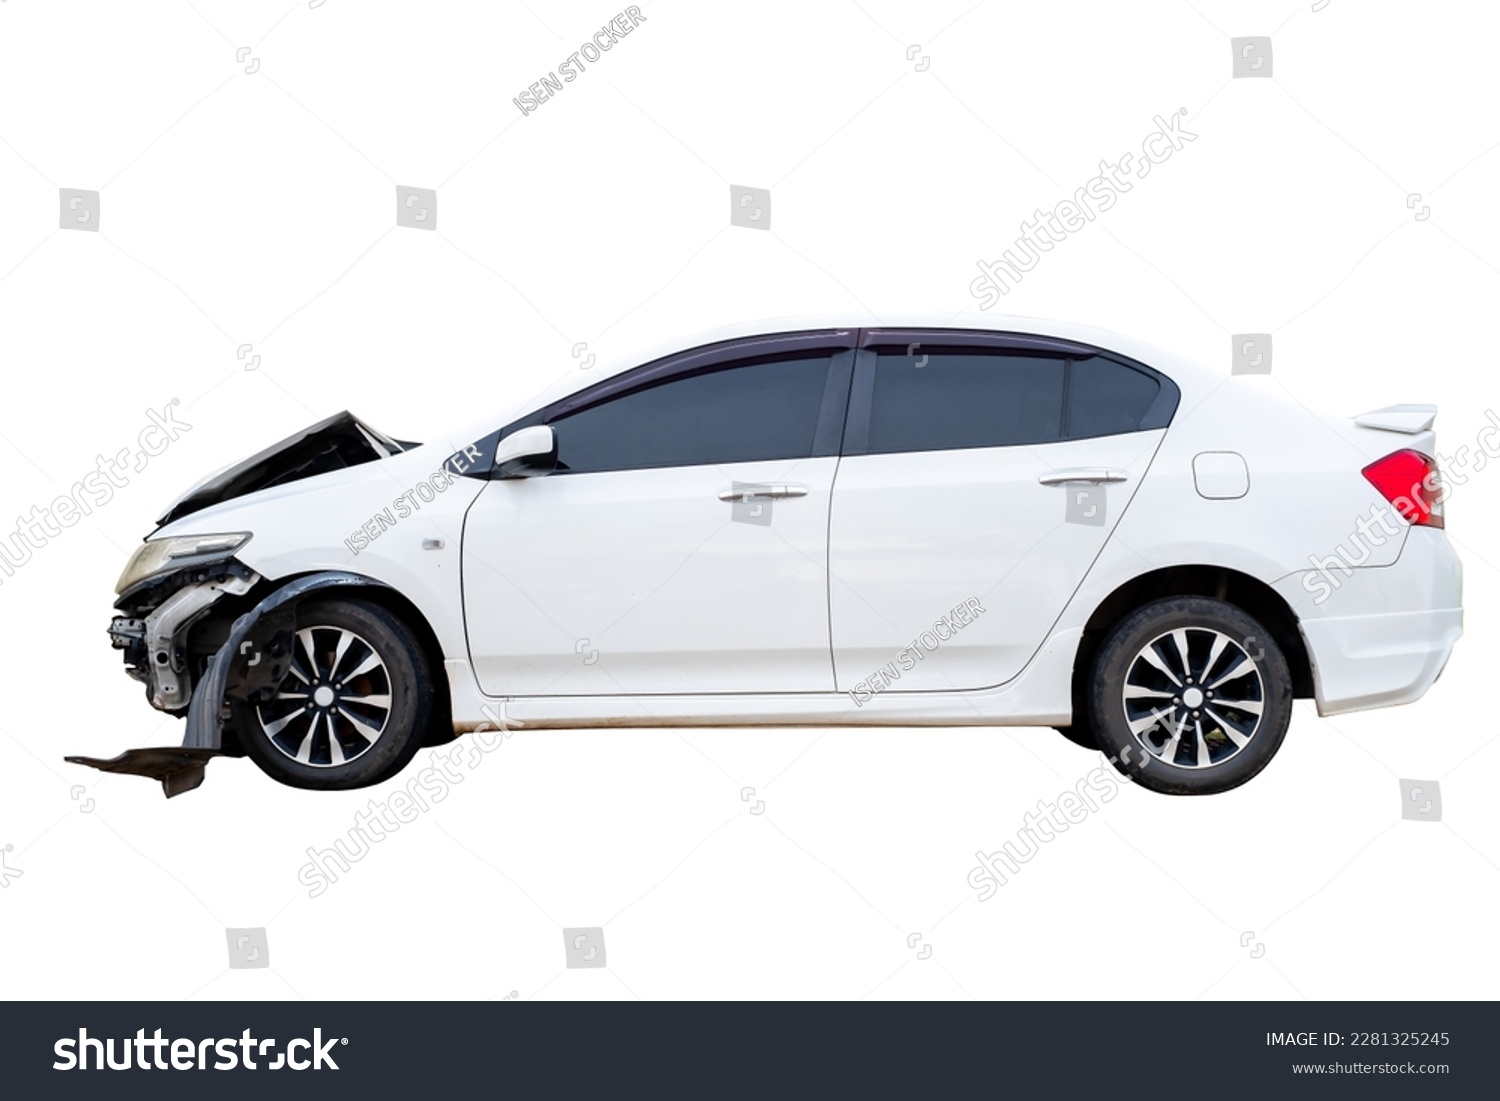 Side of white car get damaged by accident on the road. Broken cars after collision. auto accident, isolated on white background with clipping path #2281325245